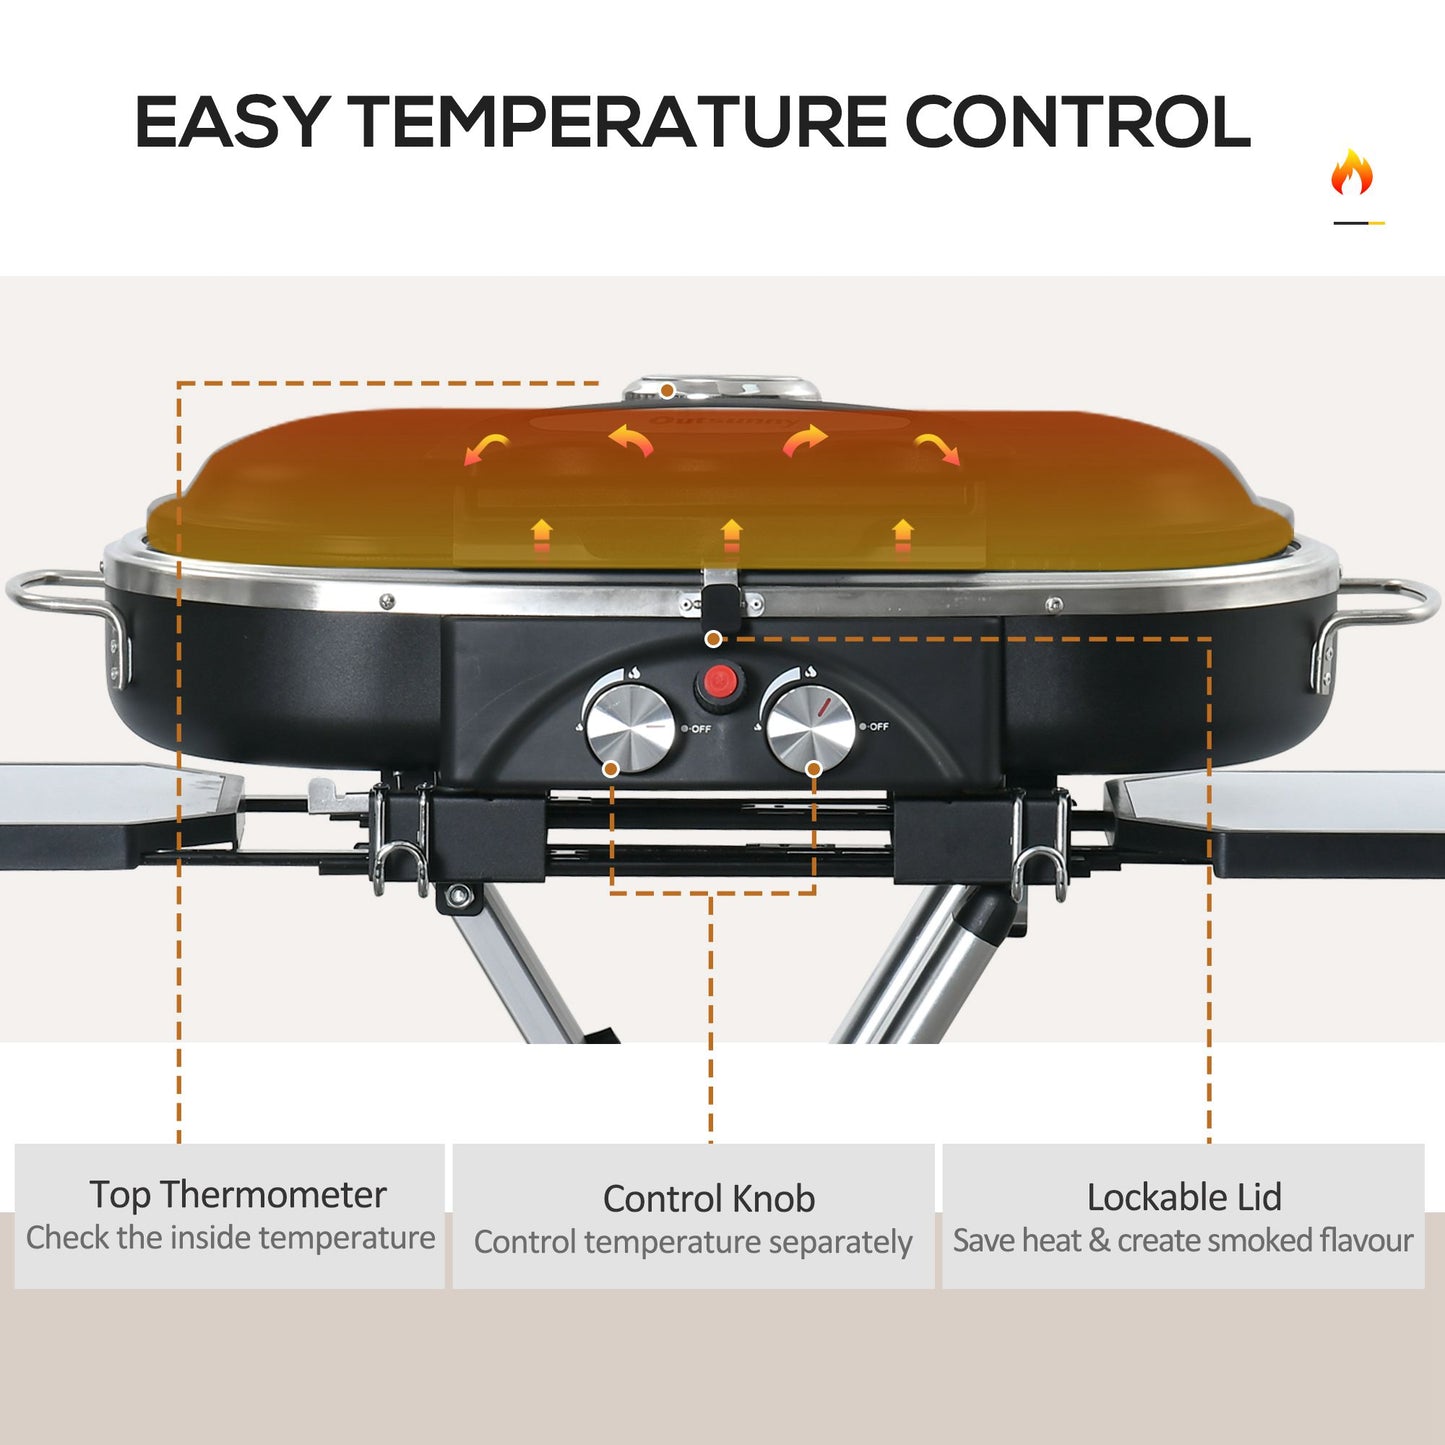 Outsunny Foldable Gas BBQ Grill 2 Burner Garden Barbecue Trolley w/ Lid Side Shelves Storage Pocket Piezo Ignition Thermometer, Aluminium Alloy